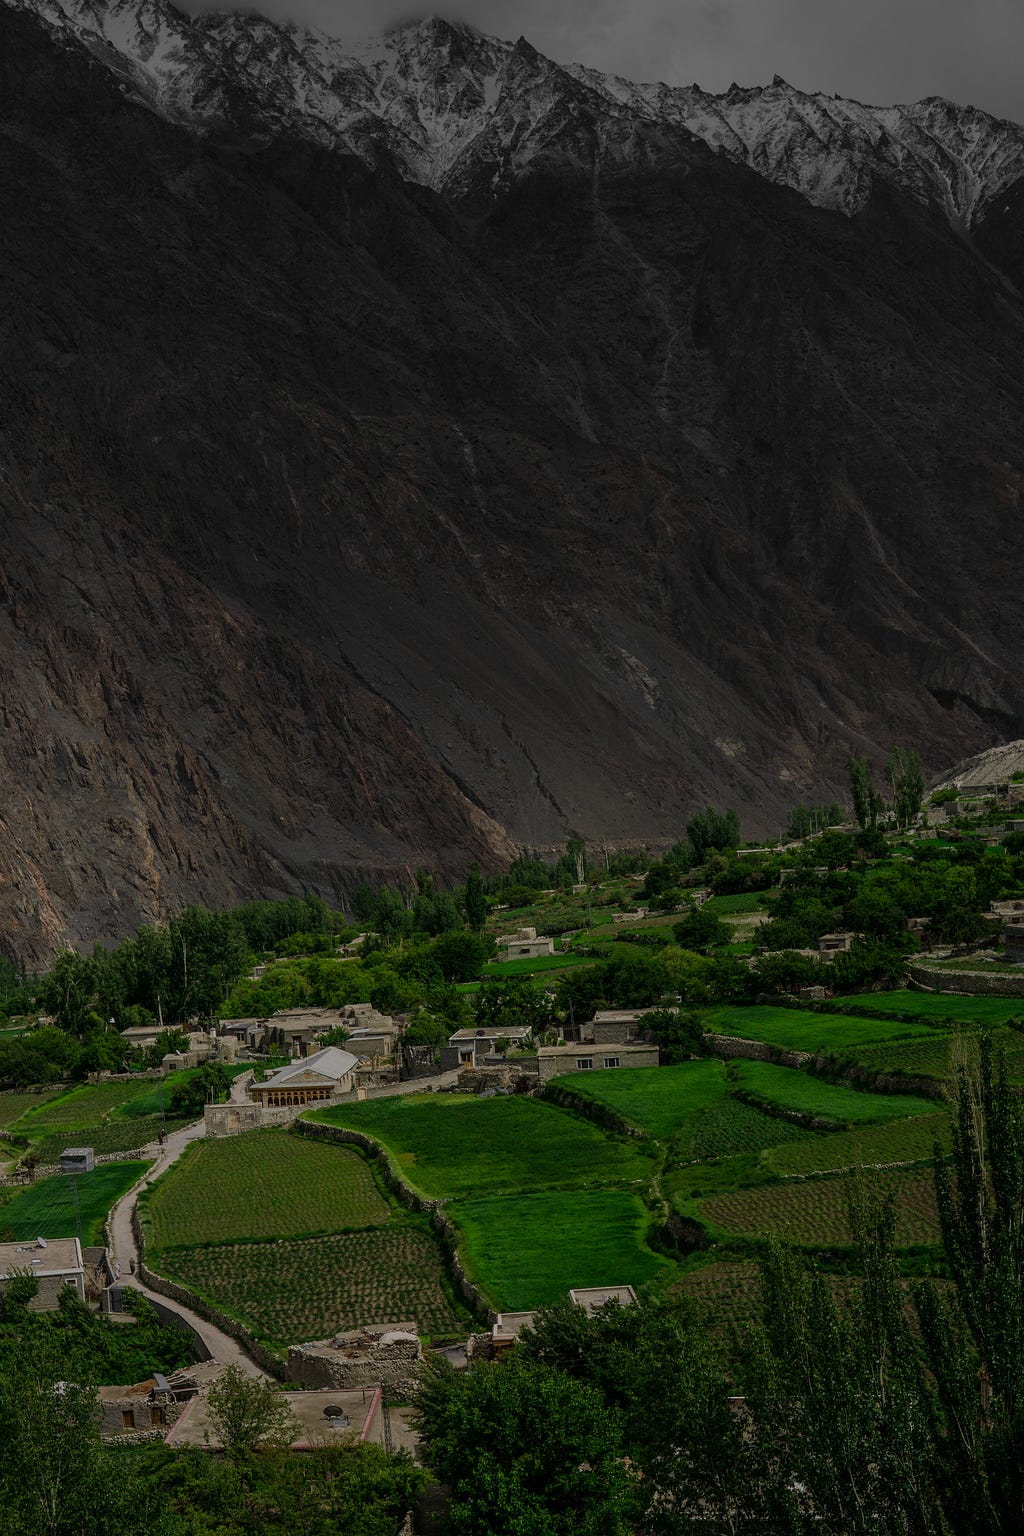 Hunza valley, Pakistan. A mountainous village in the bottom of very high peaks.